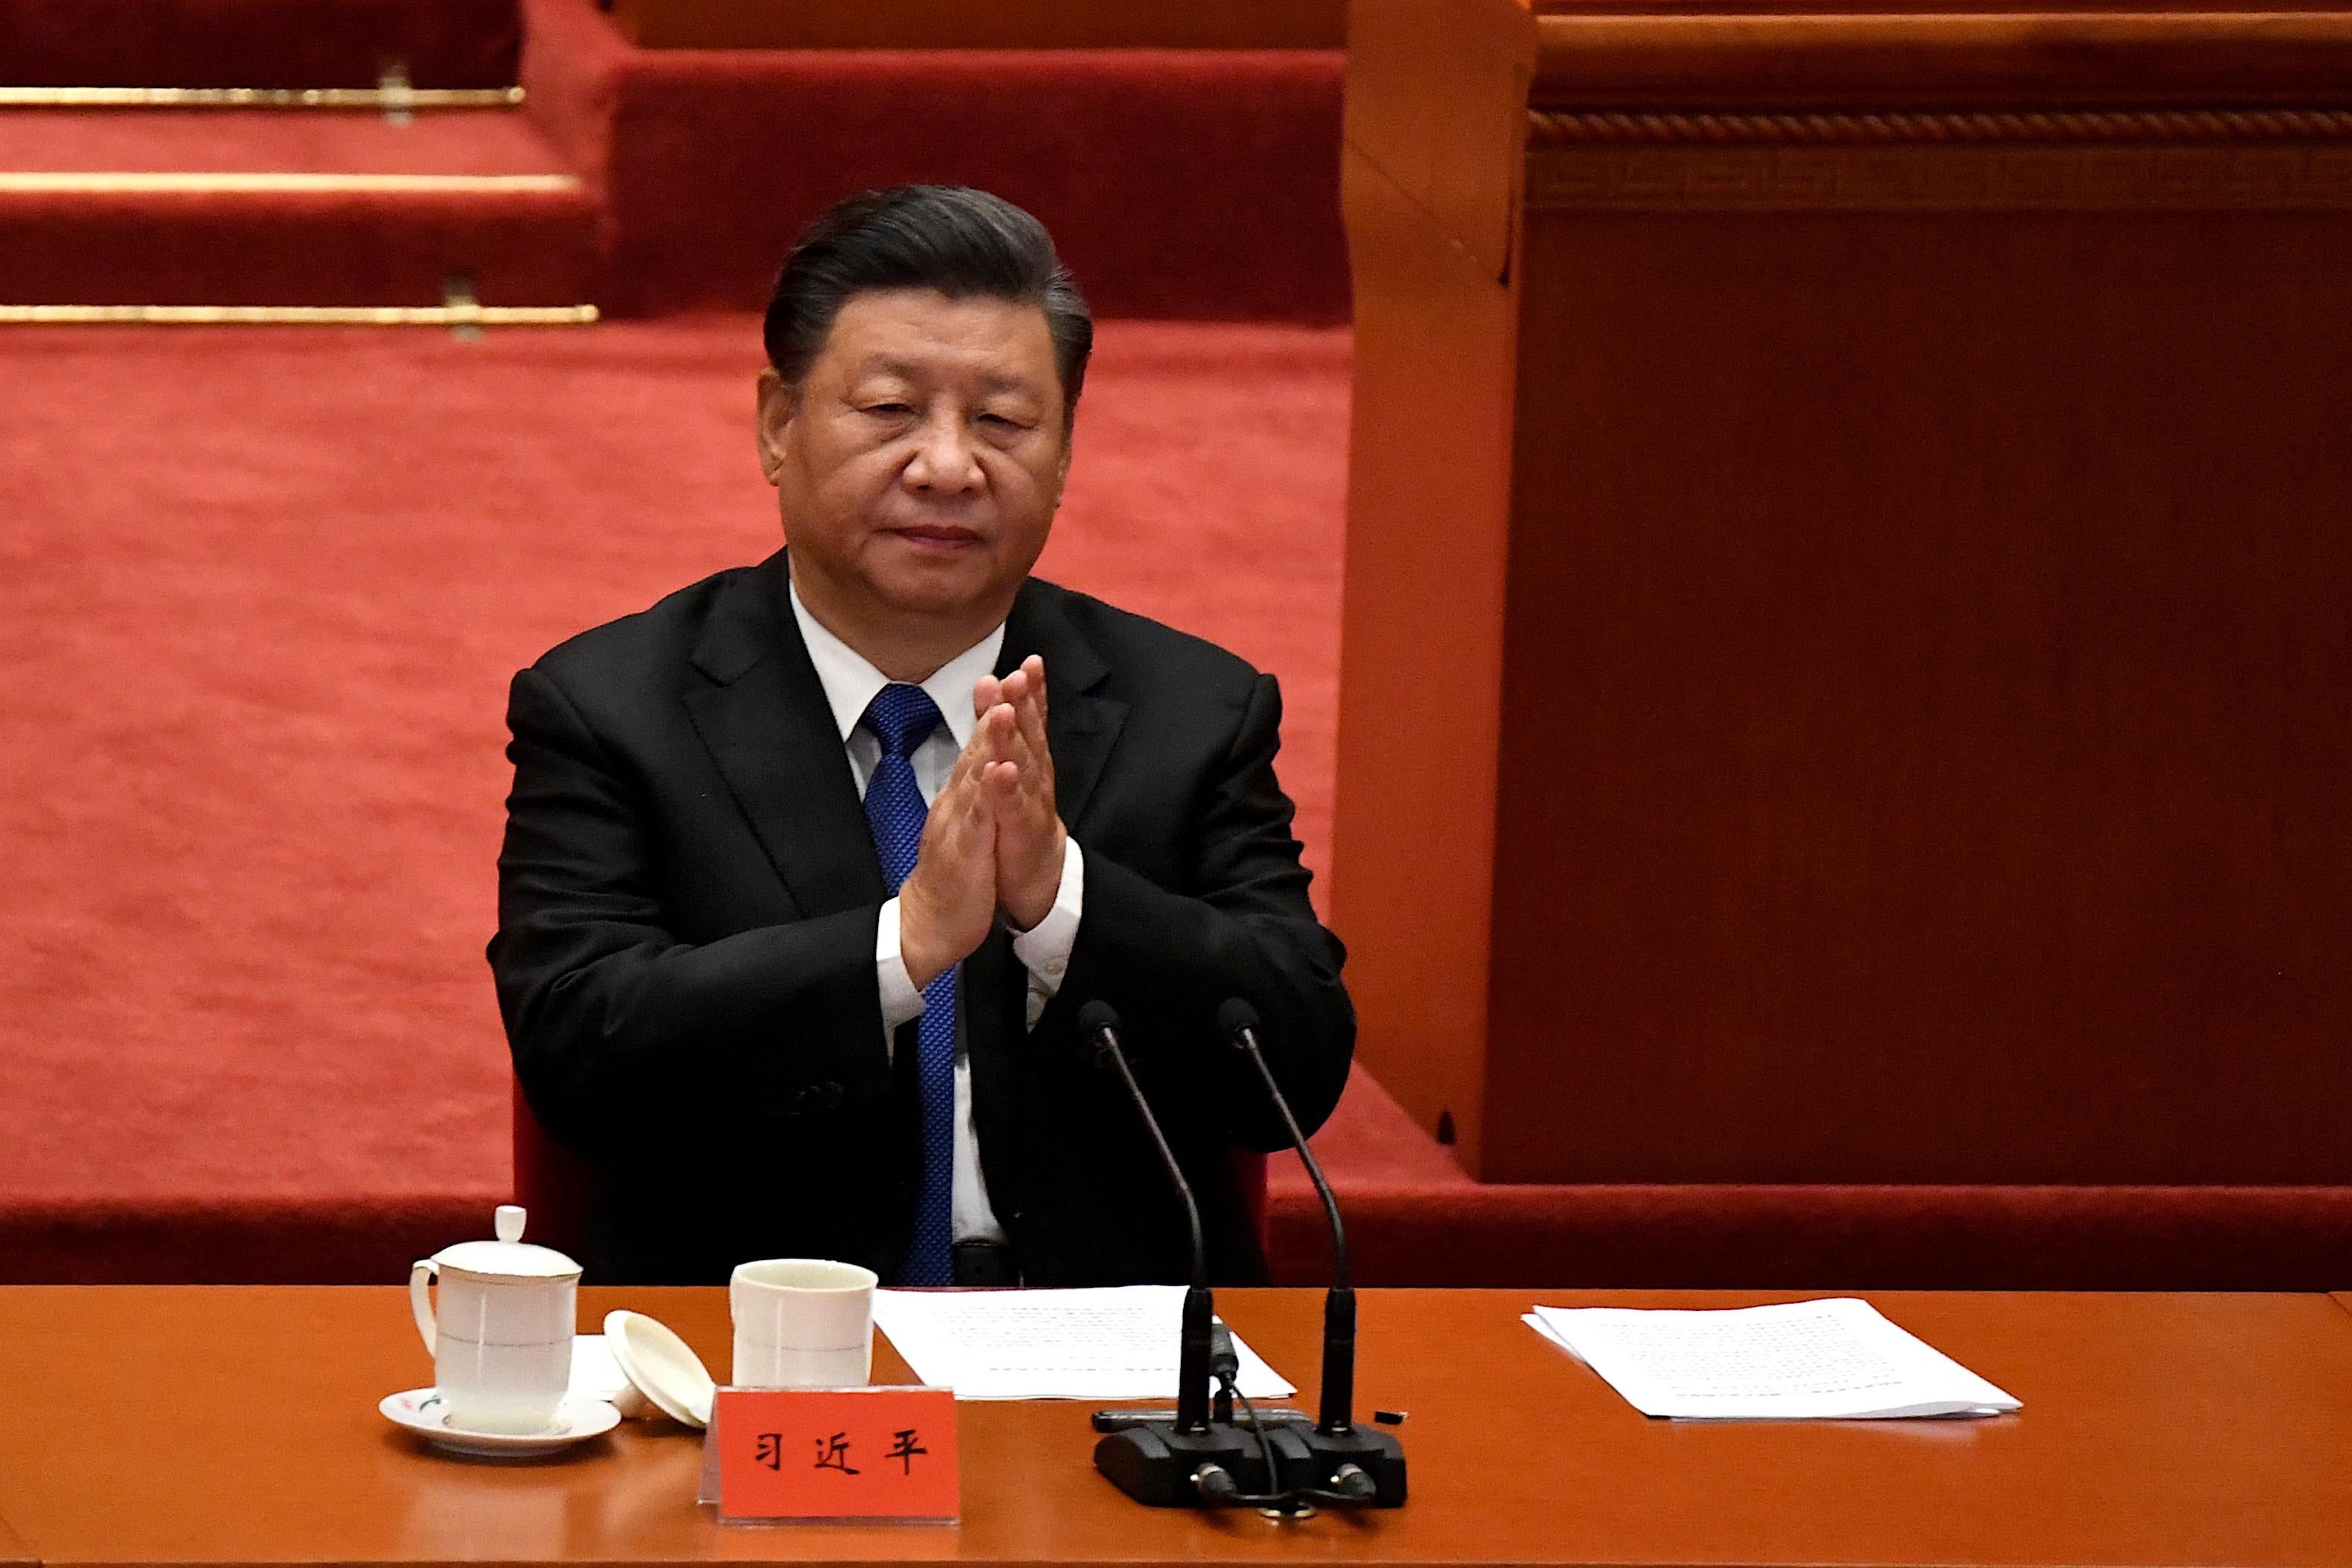 Xi Jinping sits at a table and folds his hands.